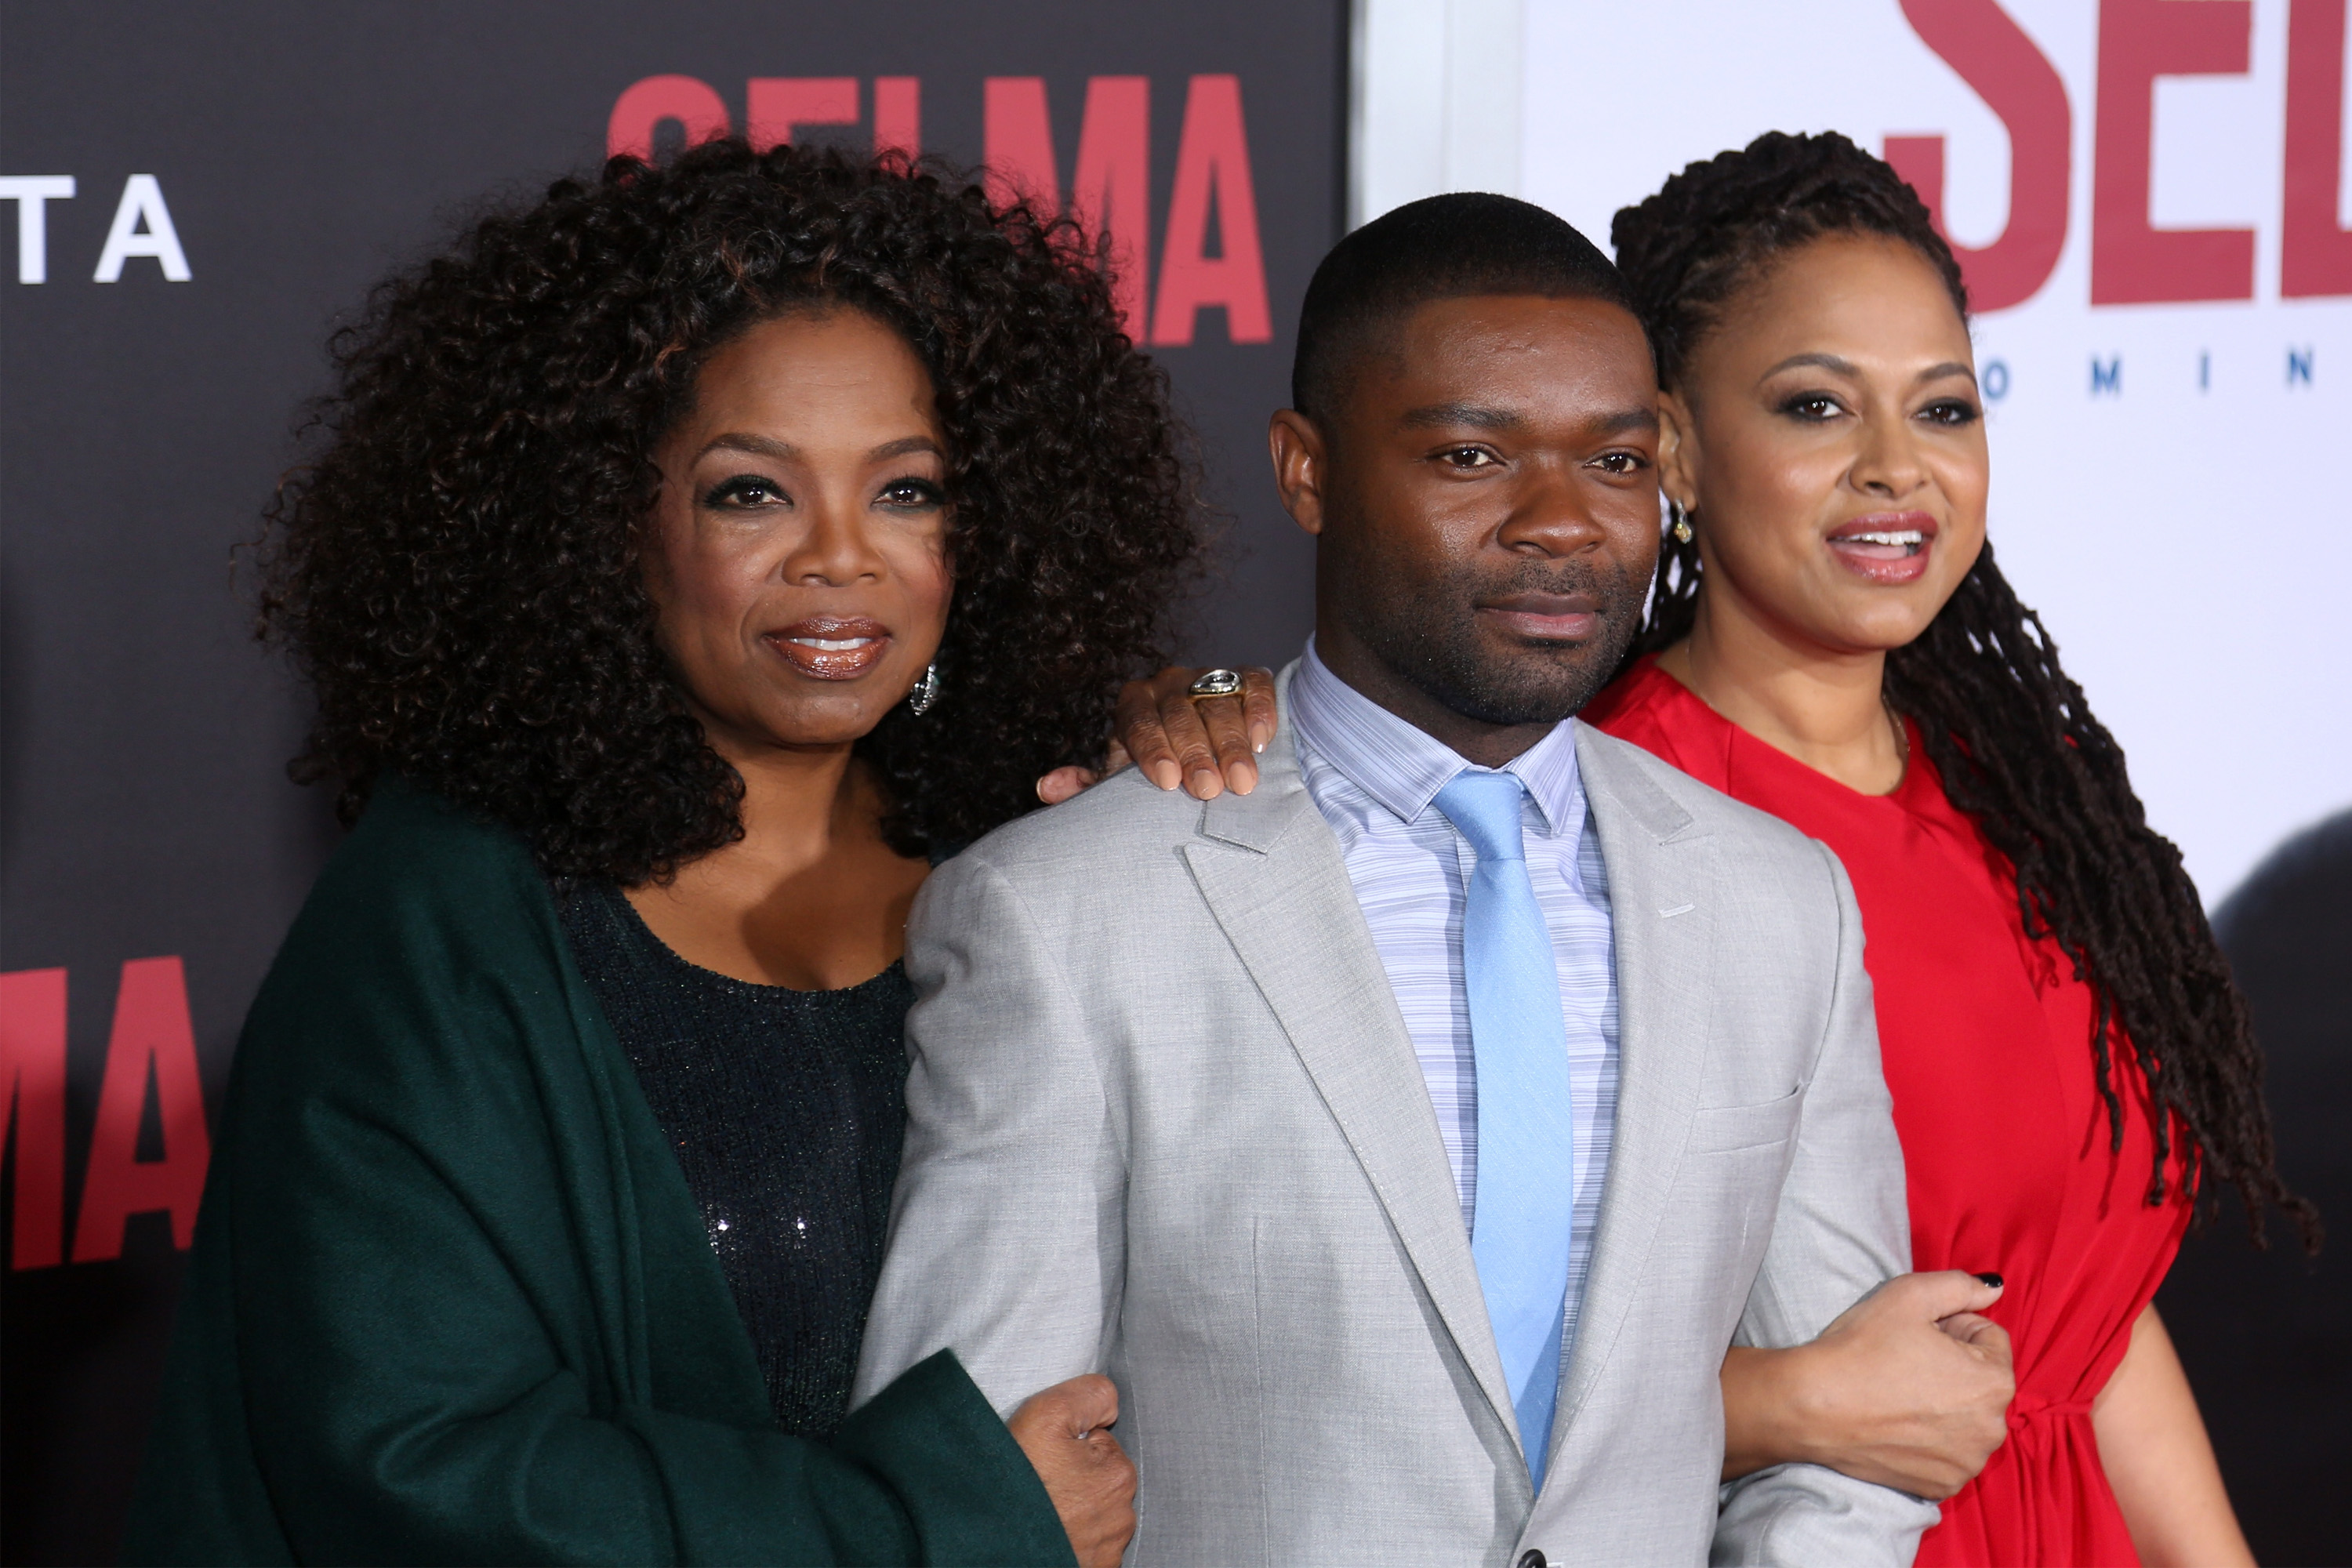 From left: Oprah, David Oyelowo, and Ava DuVernay, attend the "Selma" New York Premiere at Ziegfeld Theater on Dec. 14, 2014 in New York City. (Rob Kim—Getty Images)